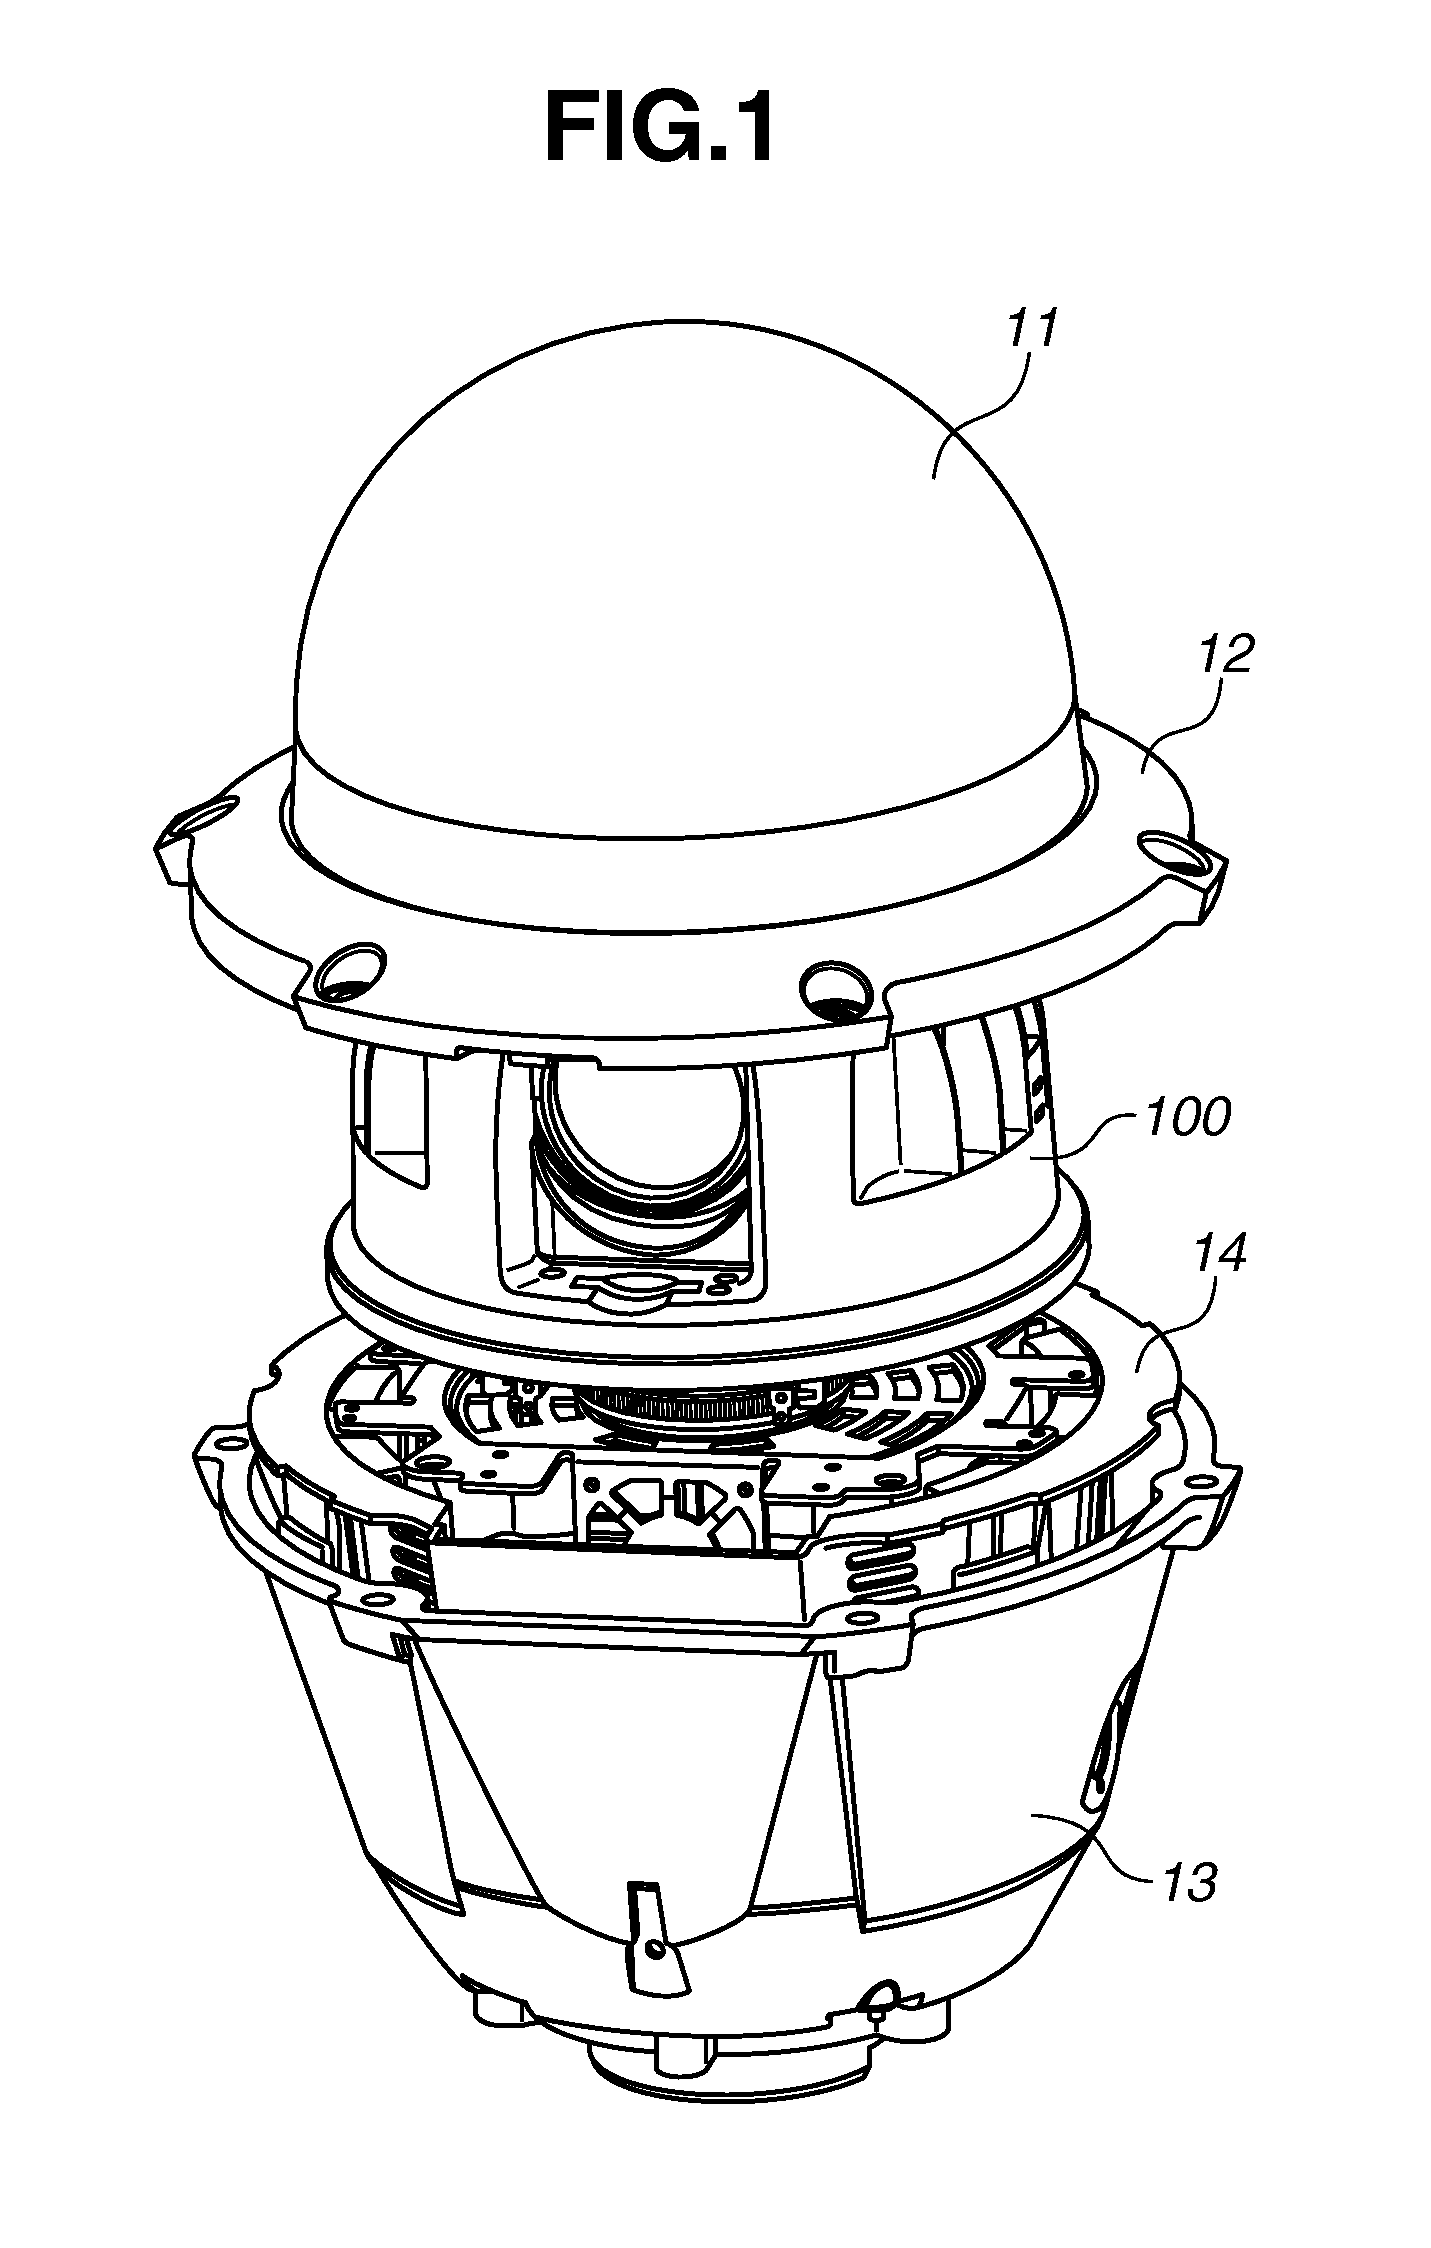 Image pickup apparatus with shock resistance